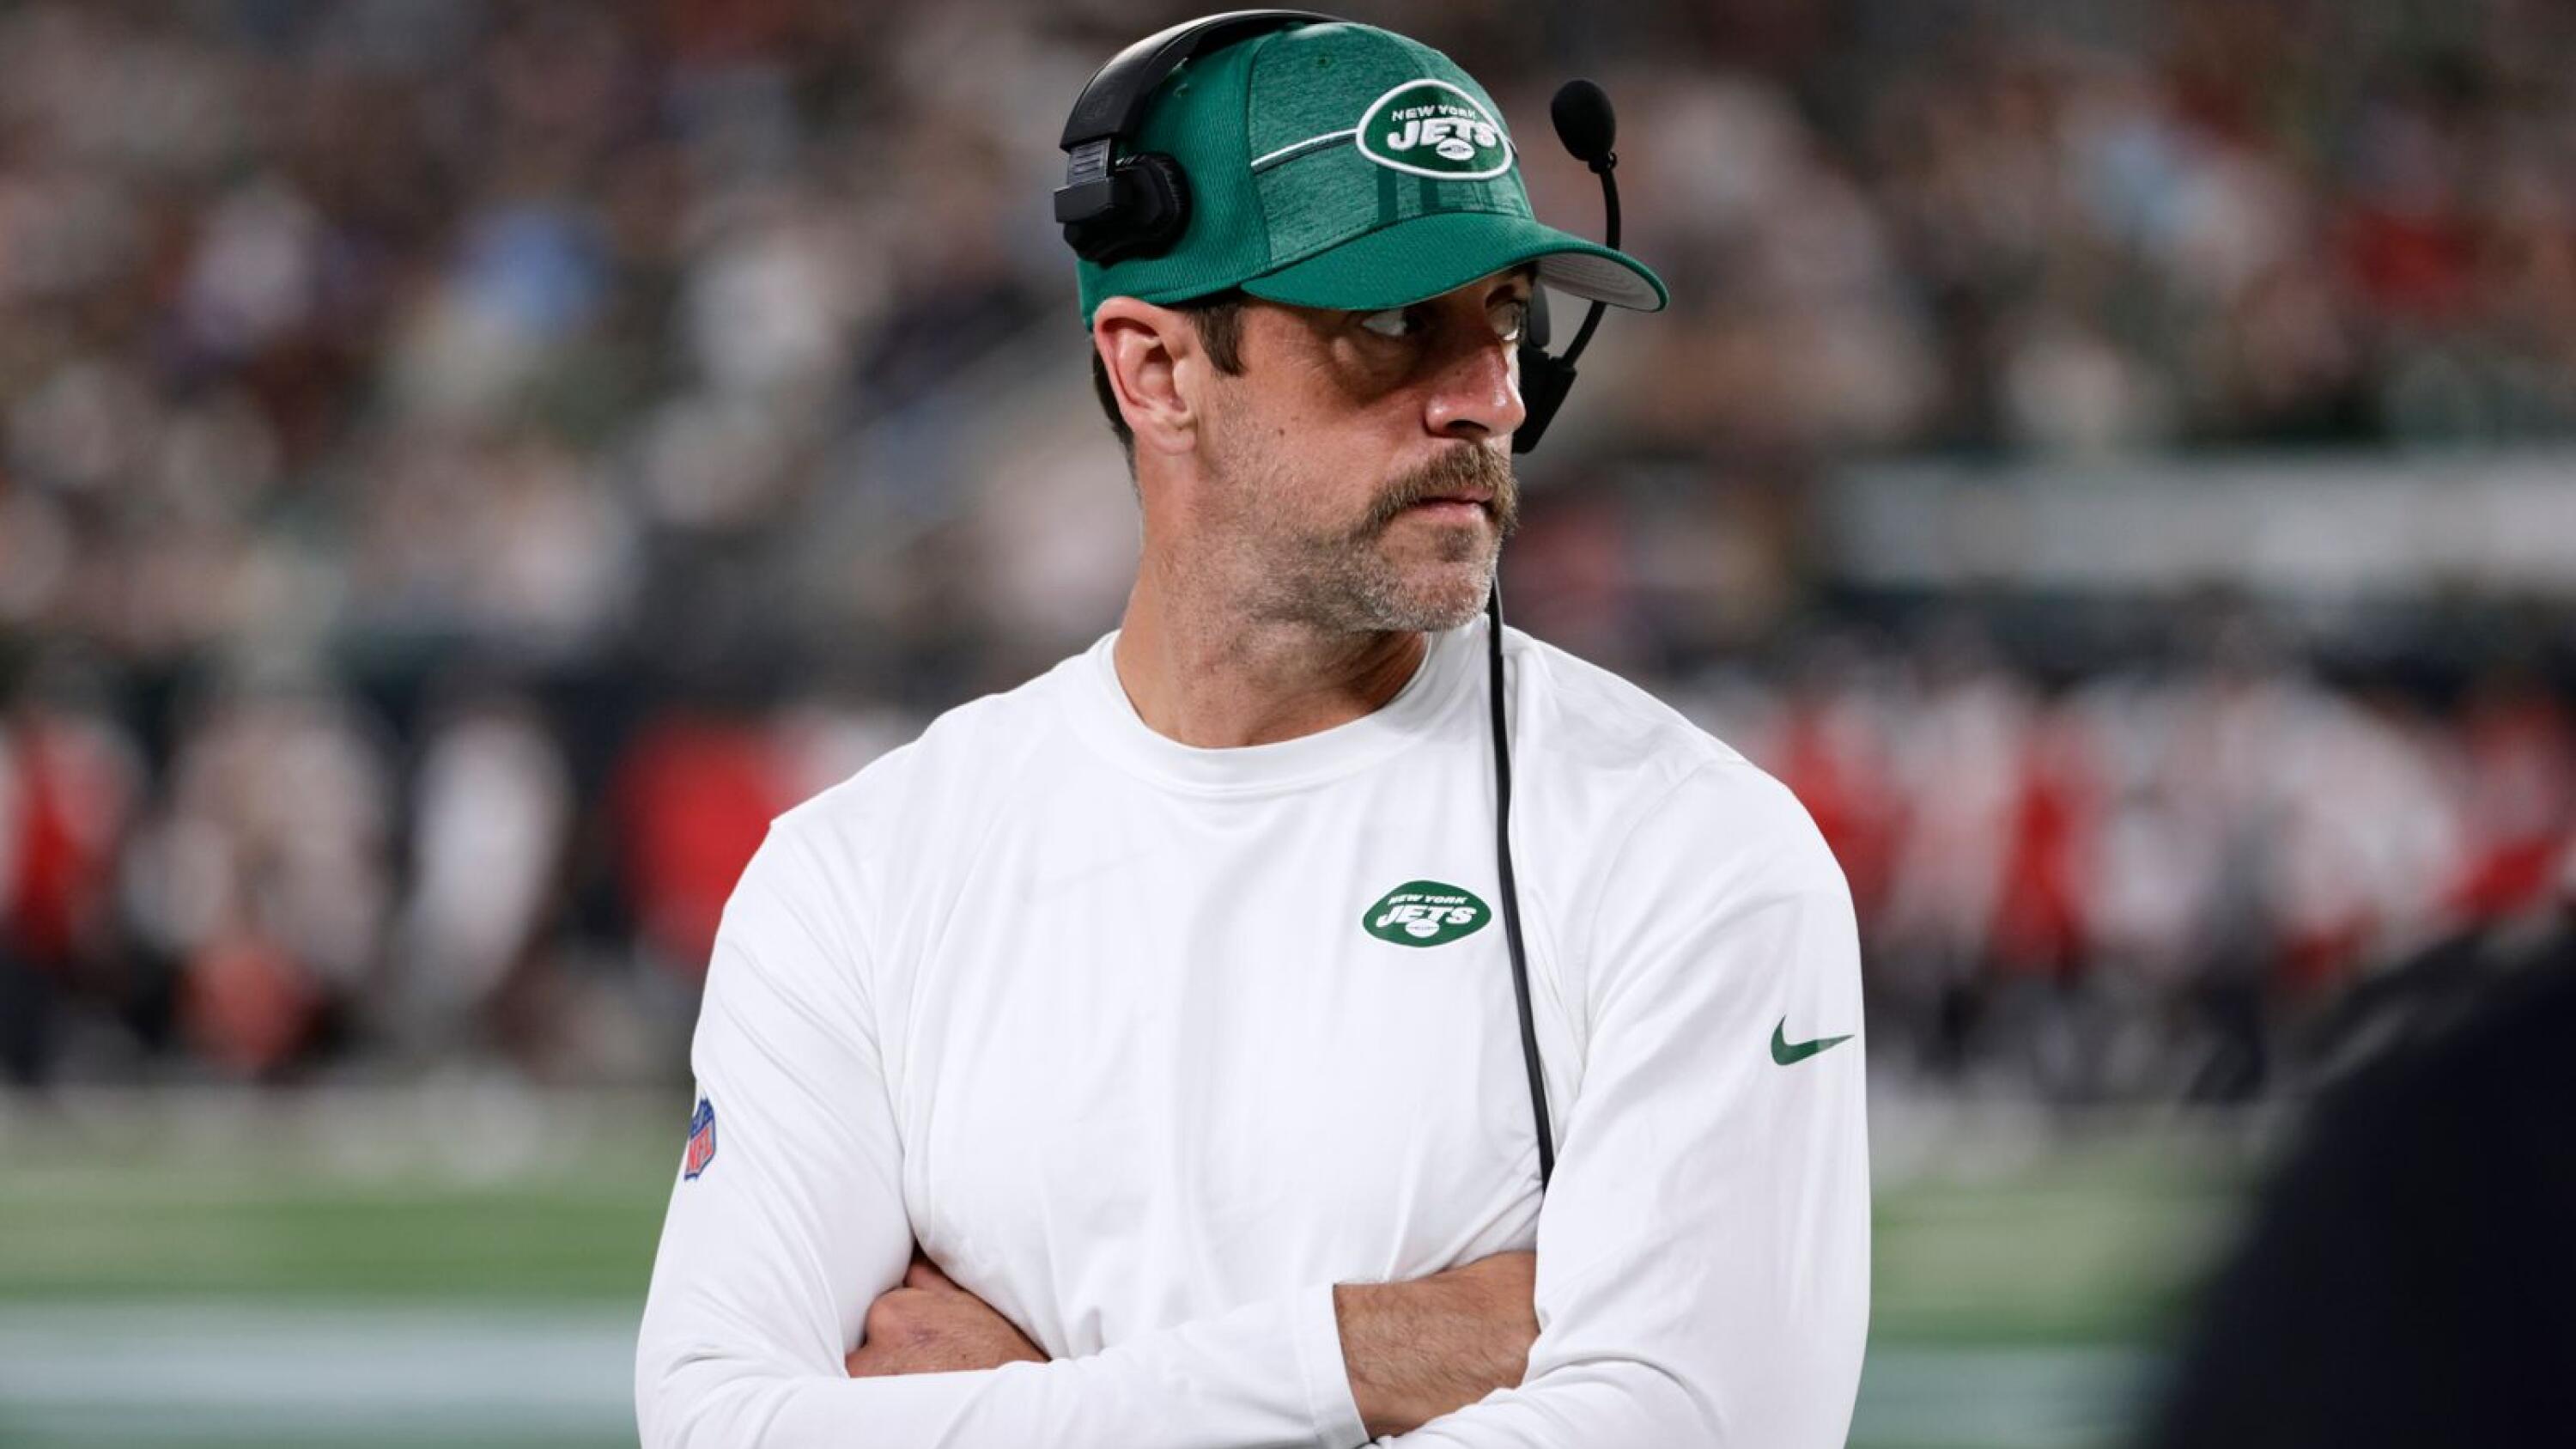 Aaron Rodgers is sidelined but the Jets will still make at least 3